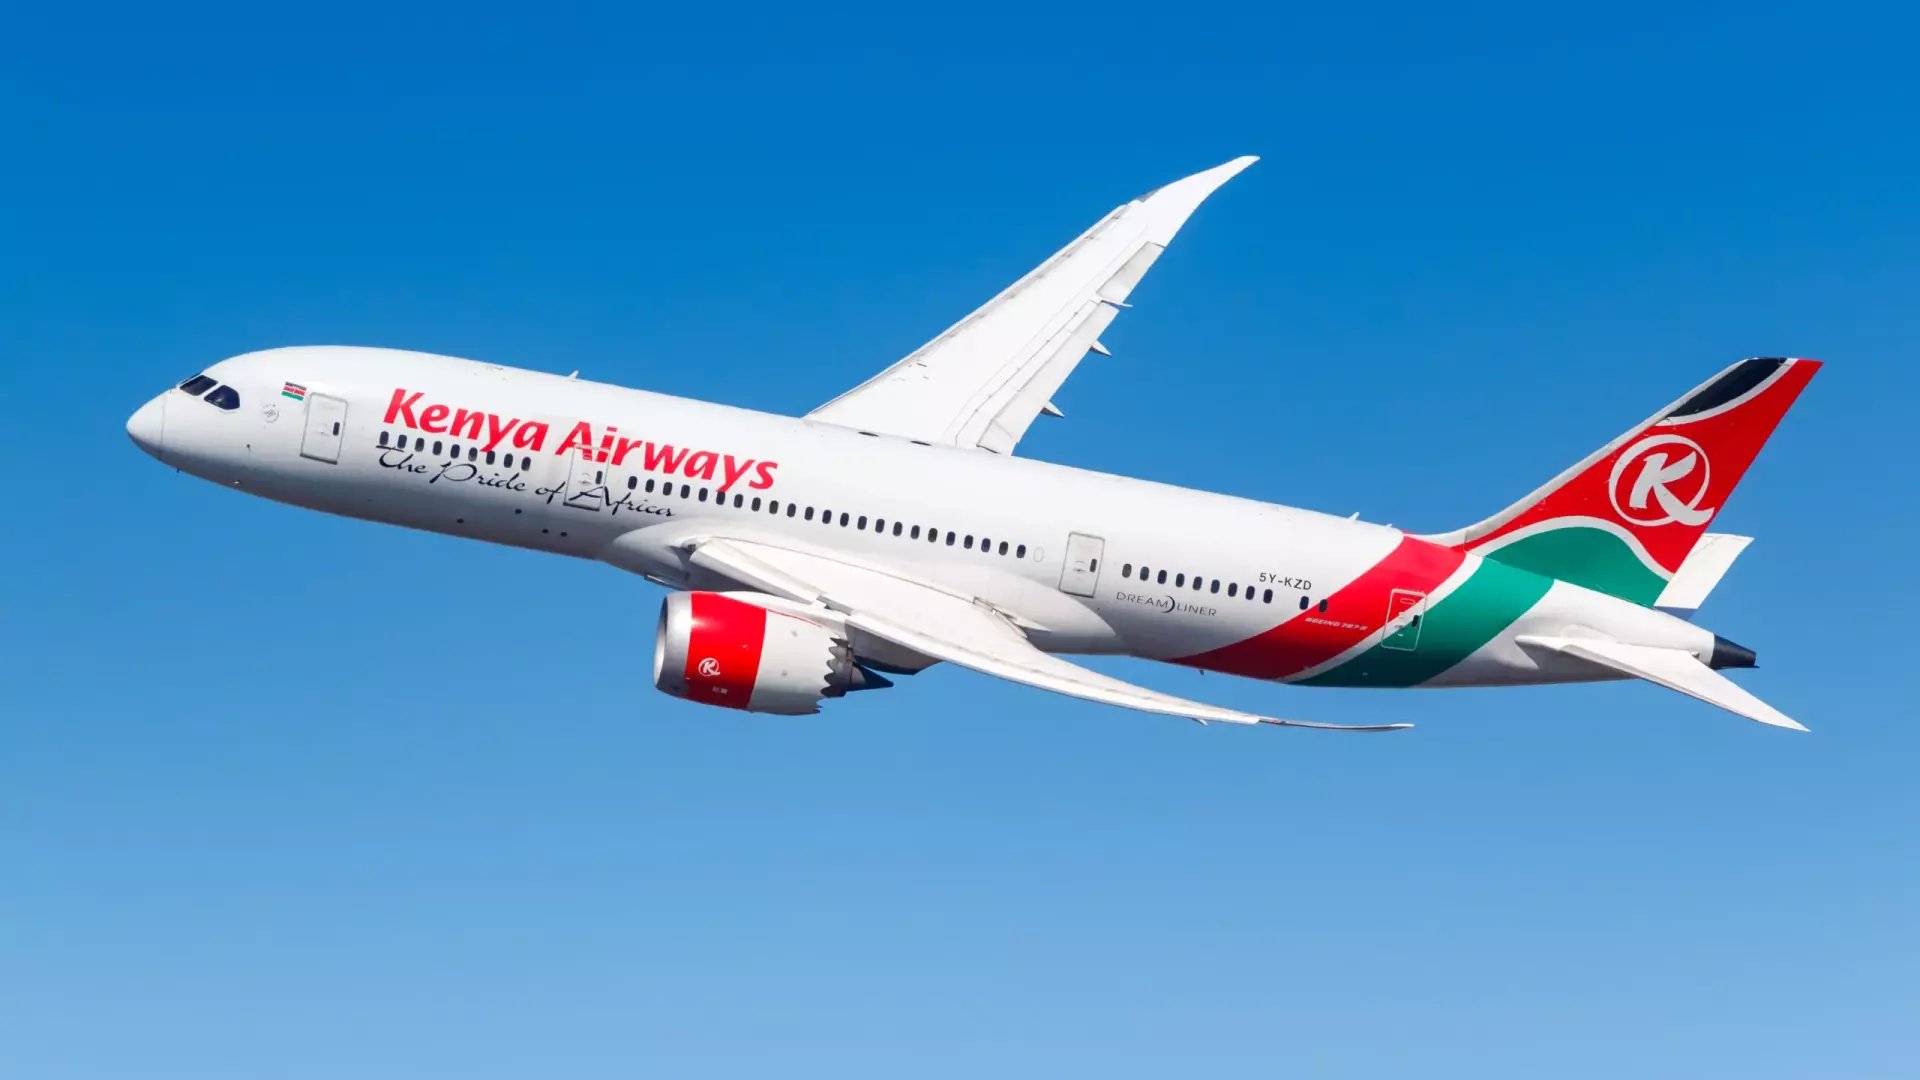 Comprehensive List of Airlines That Fly to Kenya